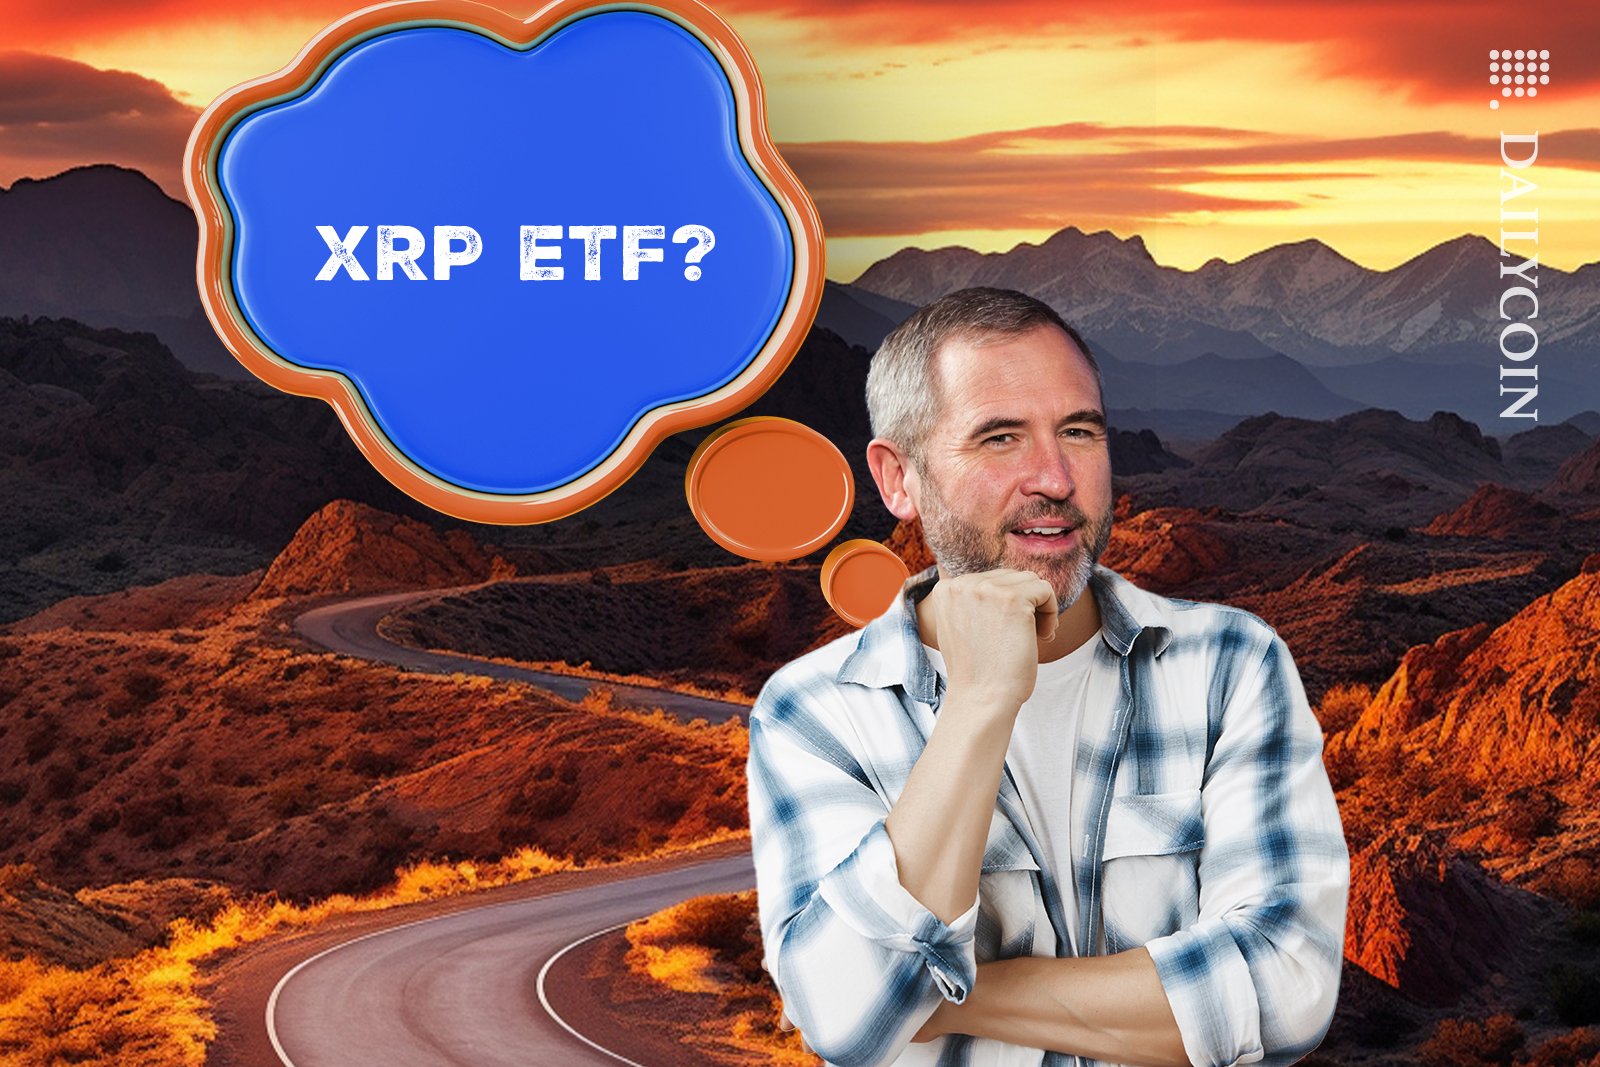 Brad Garlinghouse thinking about XRP ETF.